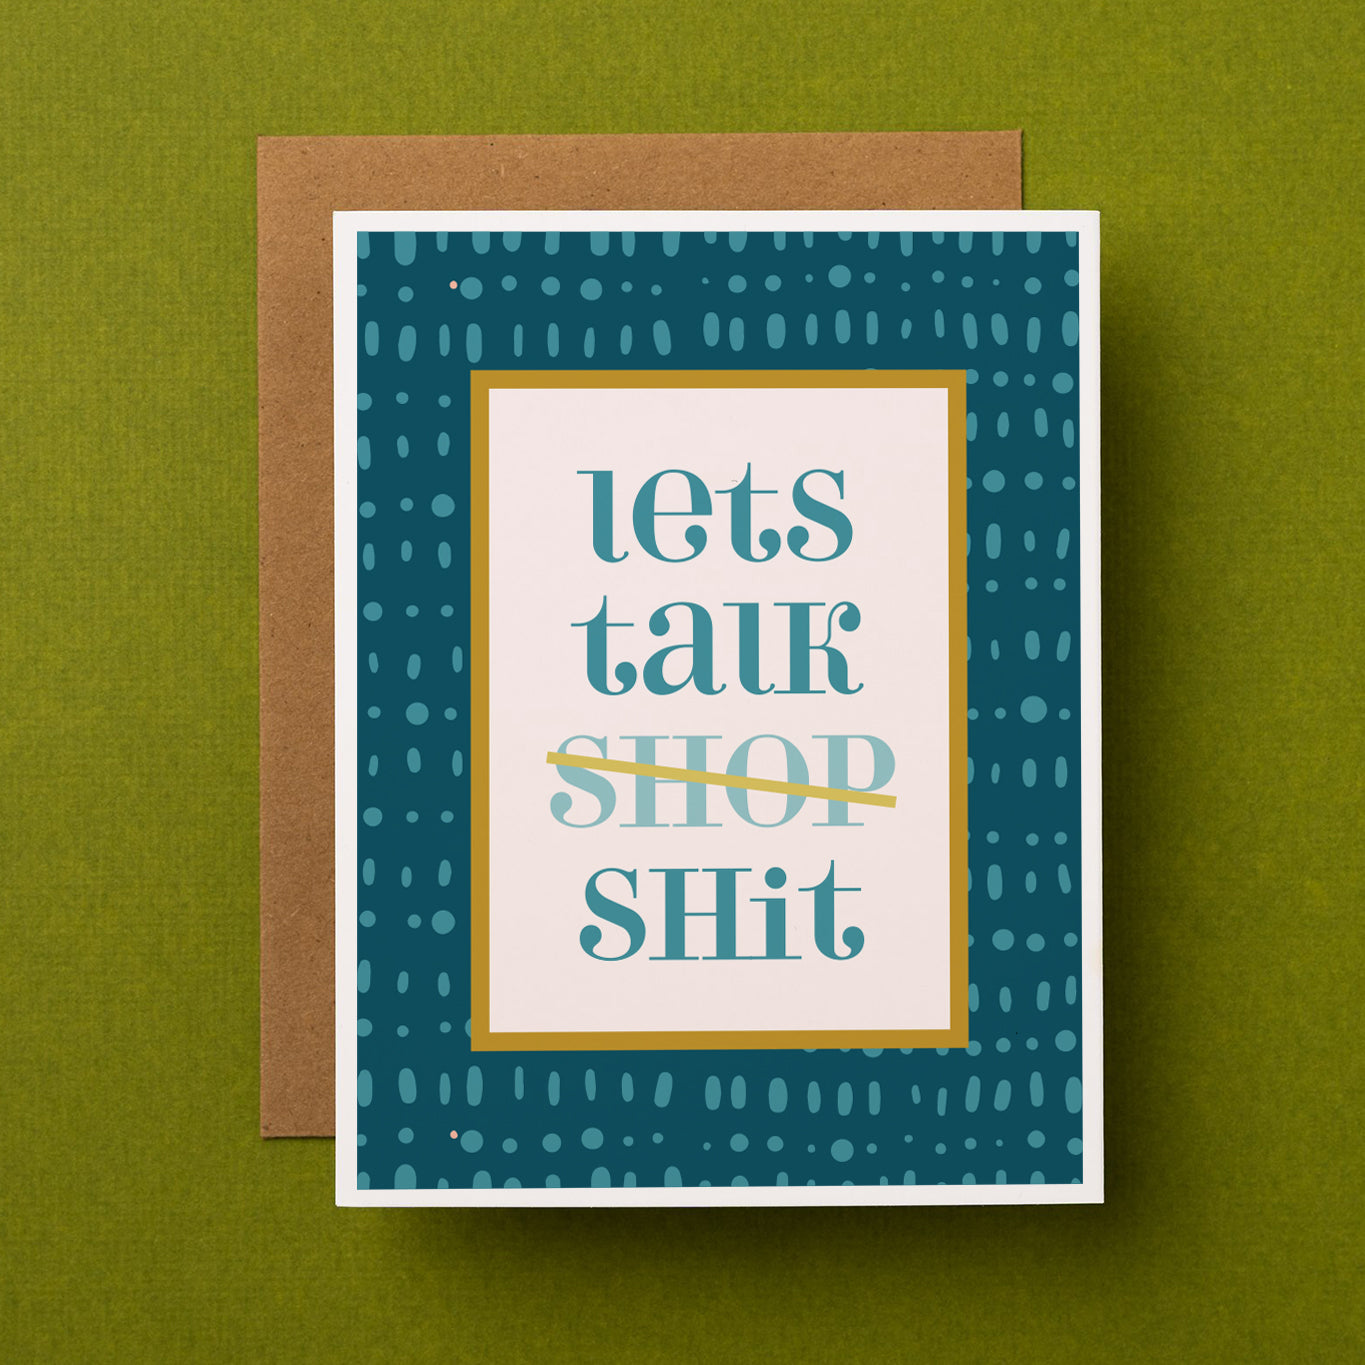 A funny friendship card perfect for a coworker that reads "Let's talk shit"